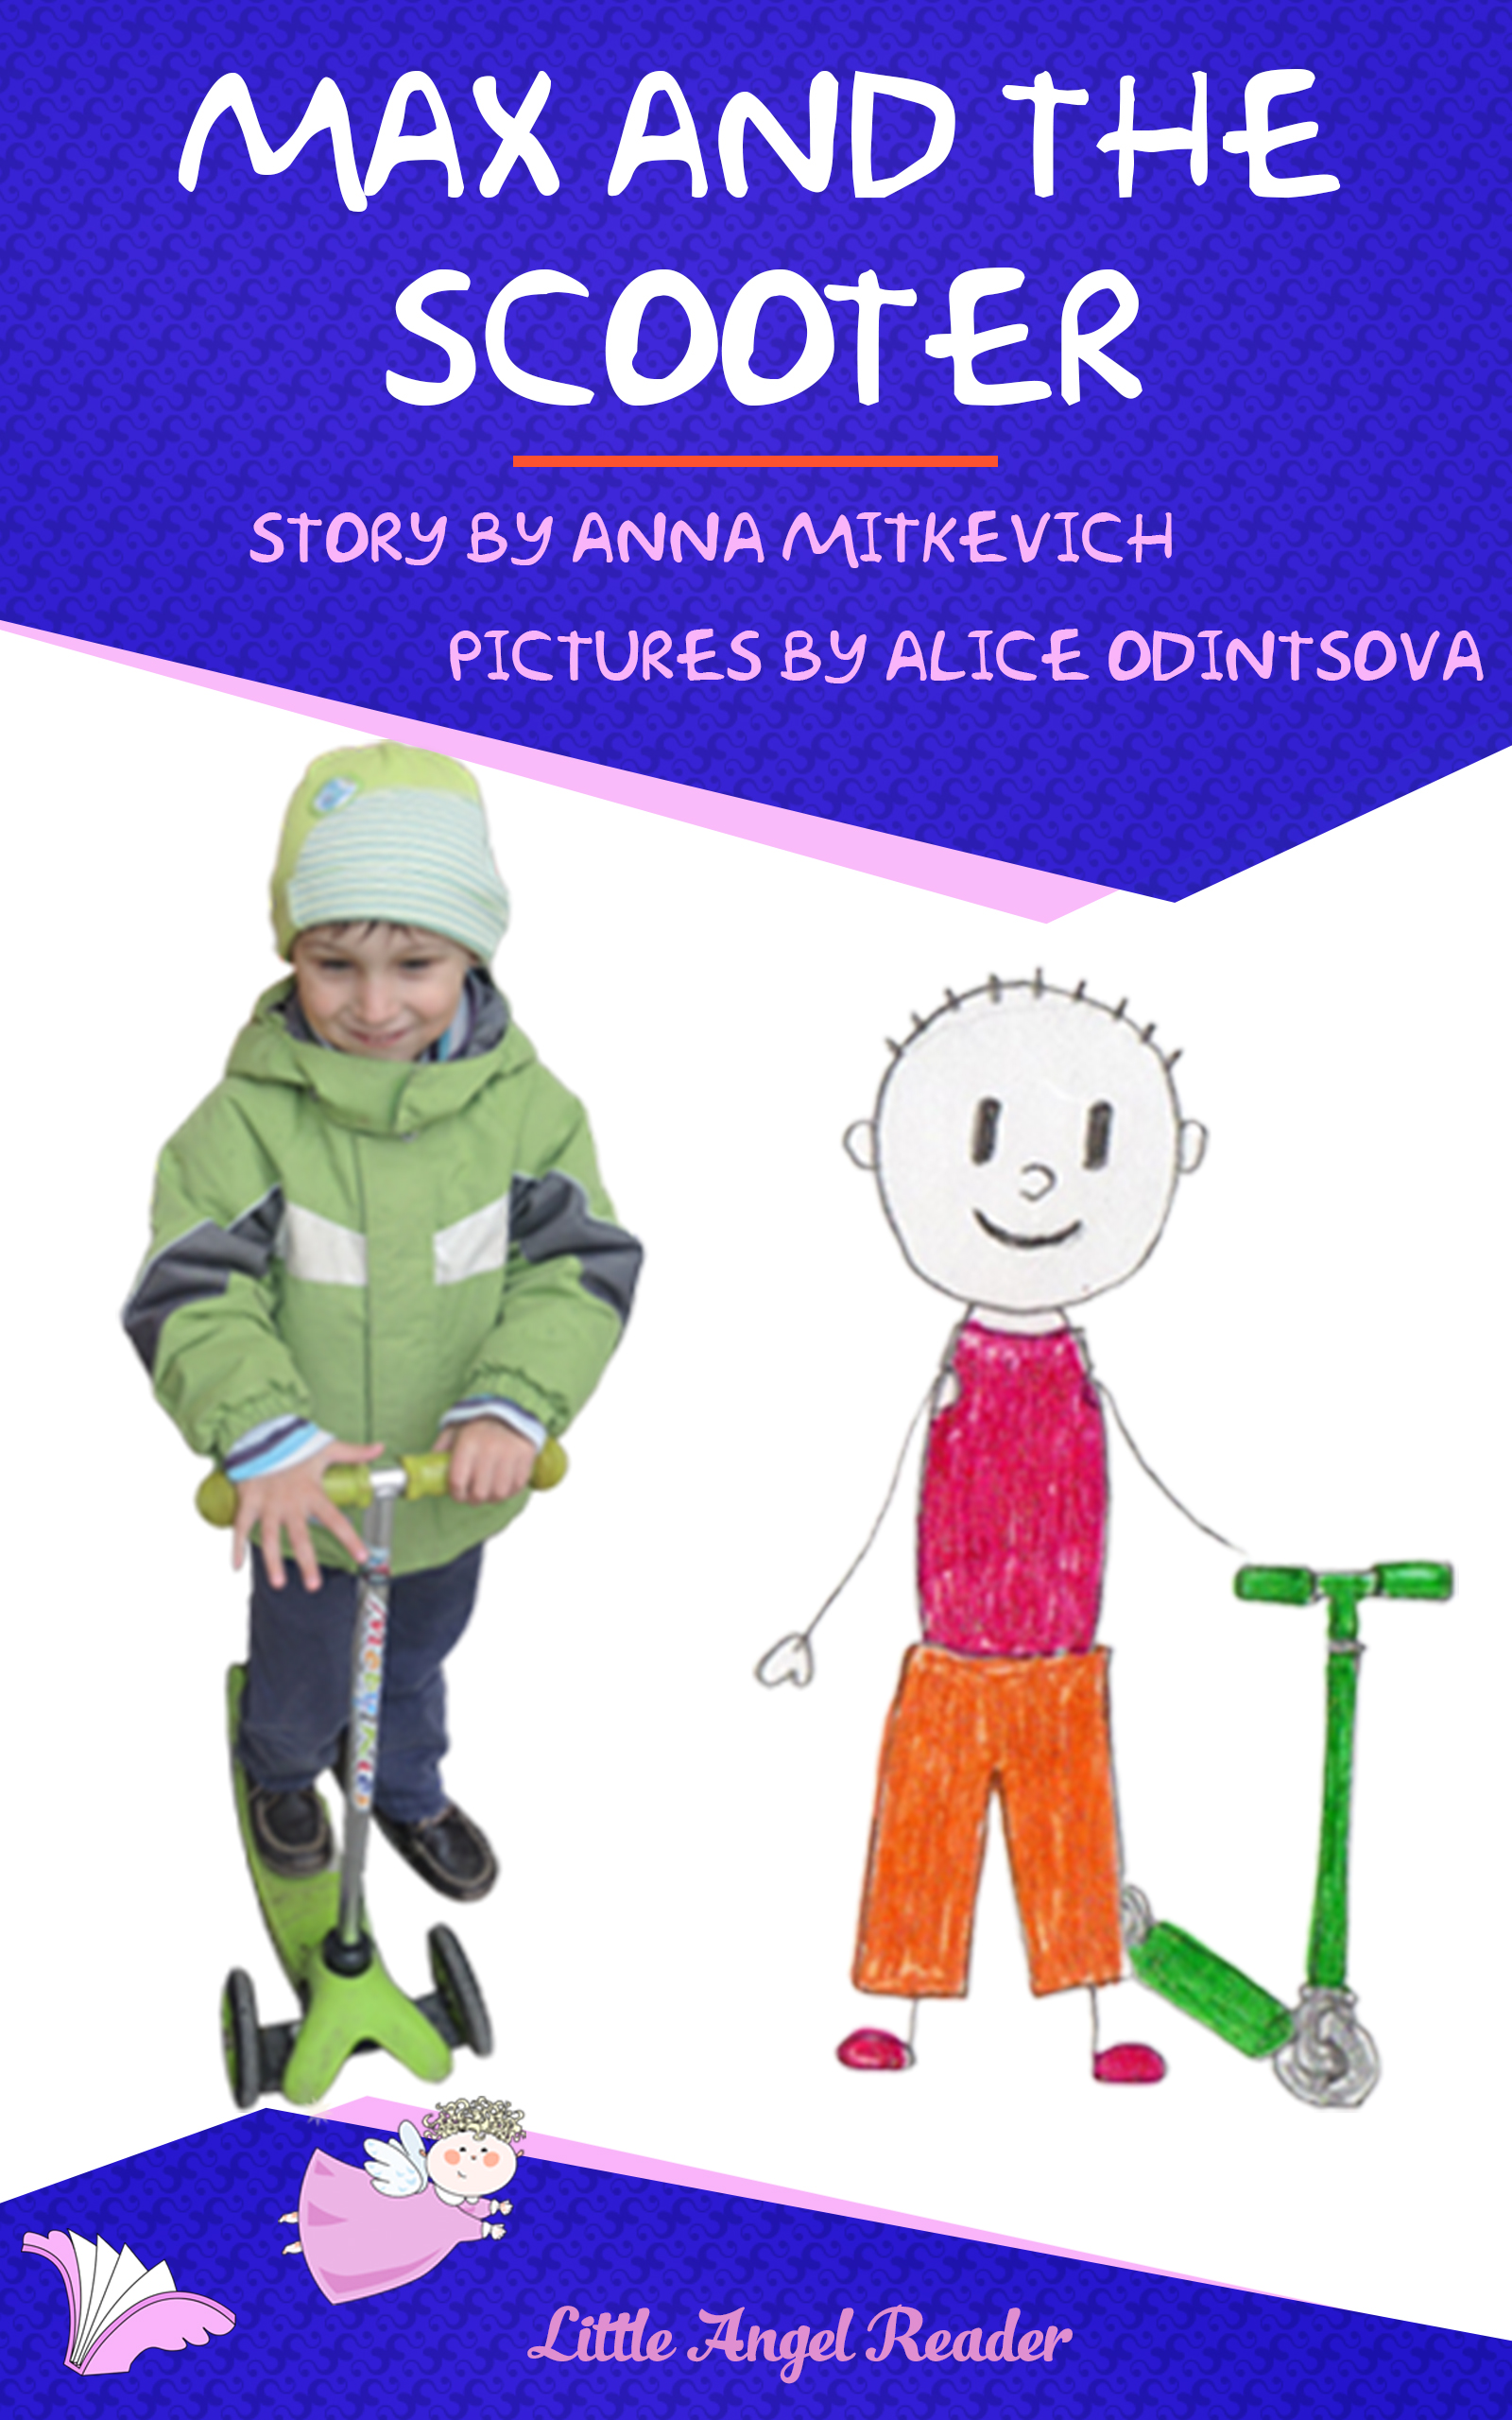 FREE: Max and the Scooter by Anna Mitkevich